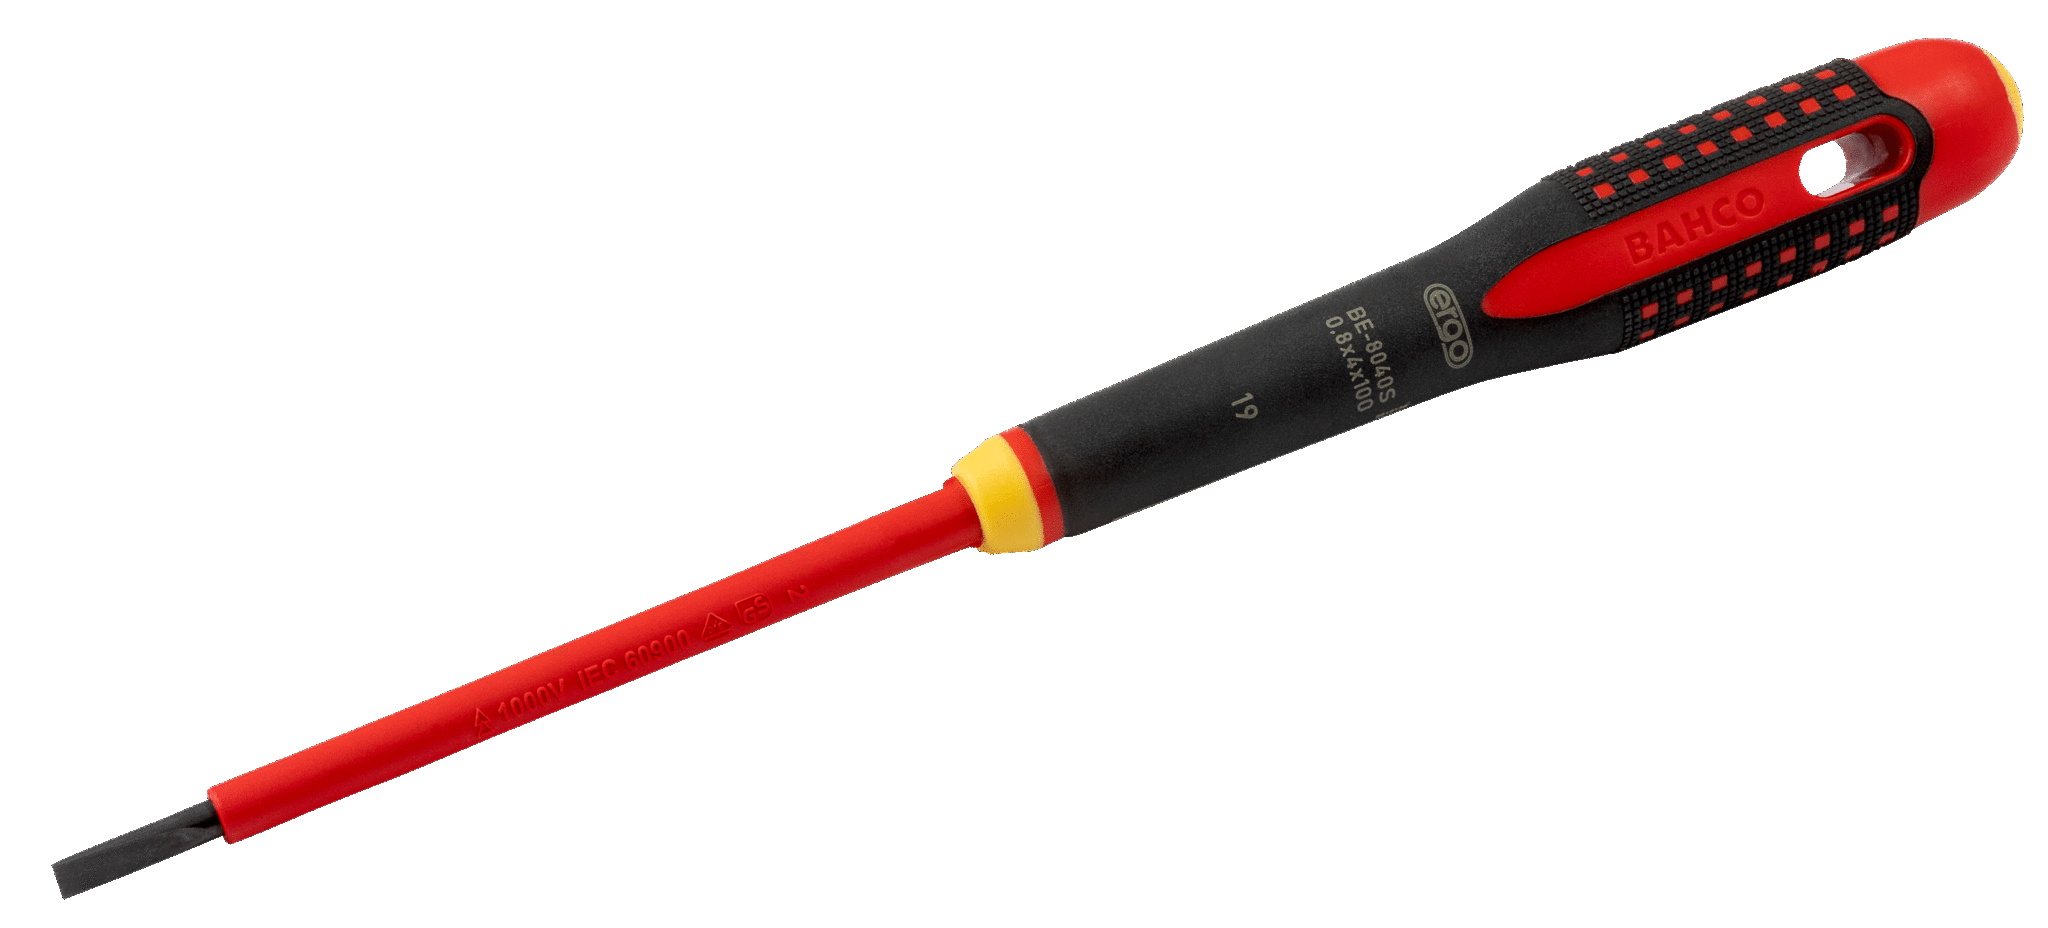 ERGO™ VDE Insulated Slotted Screwdrivers with 3-Component Handle